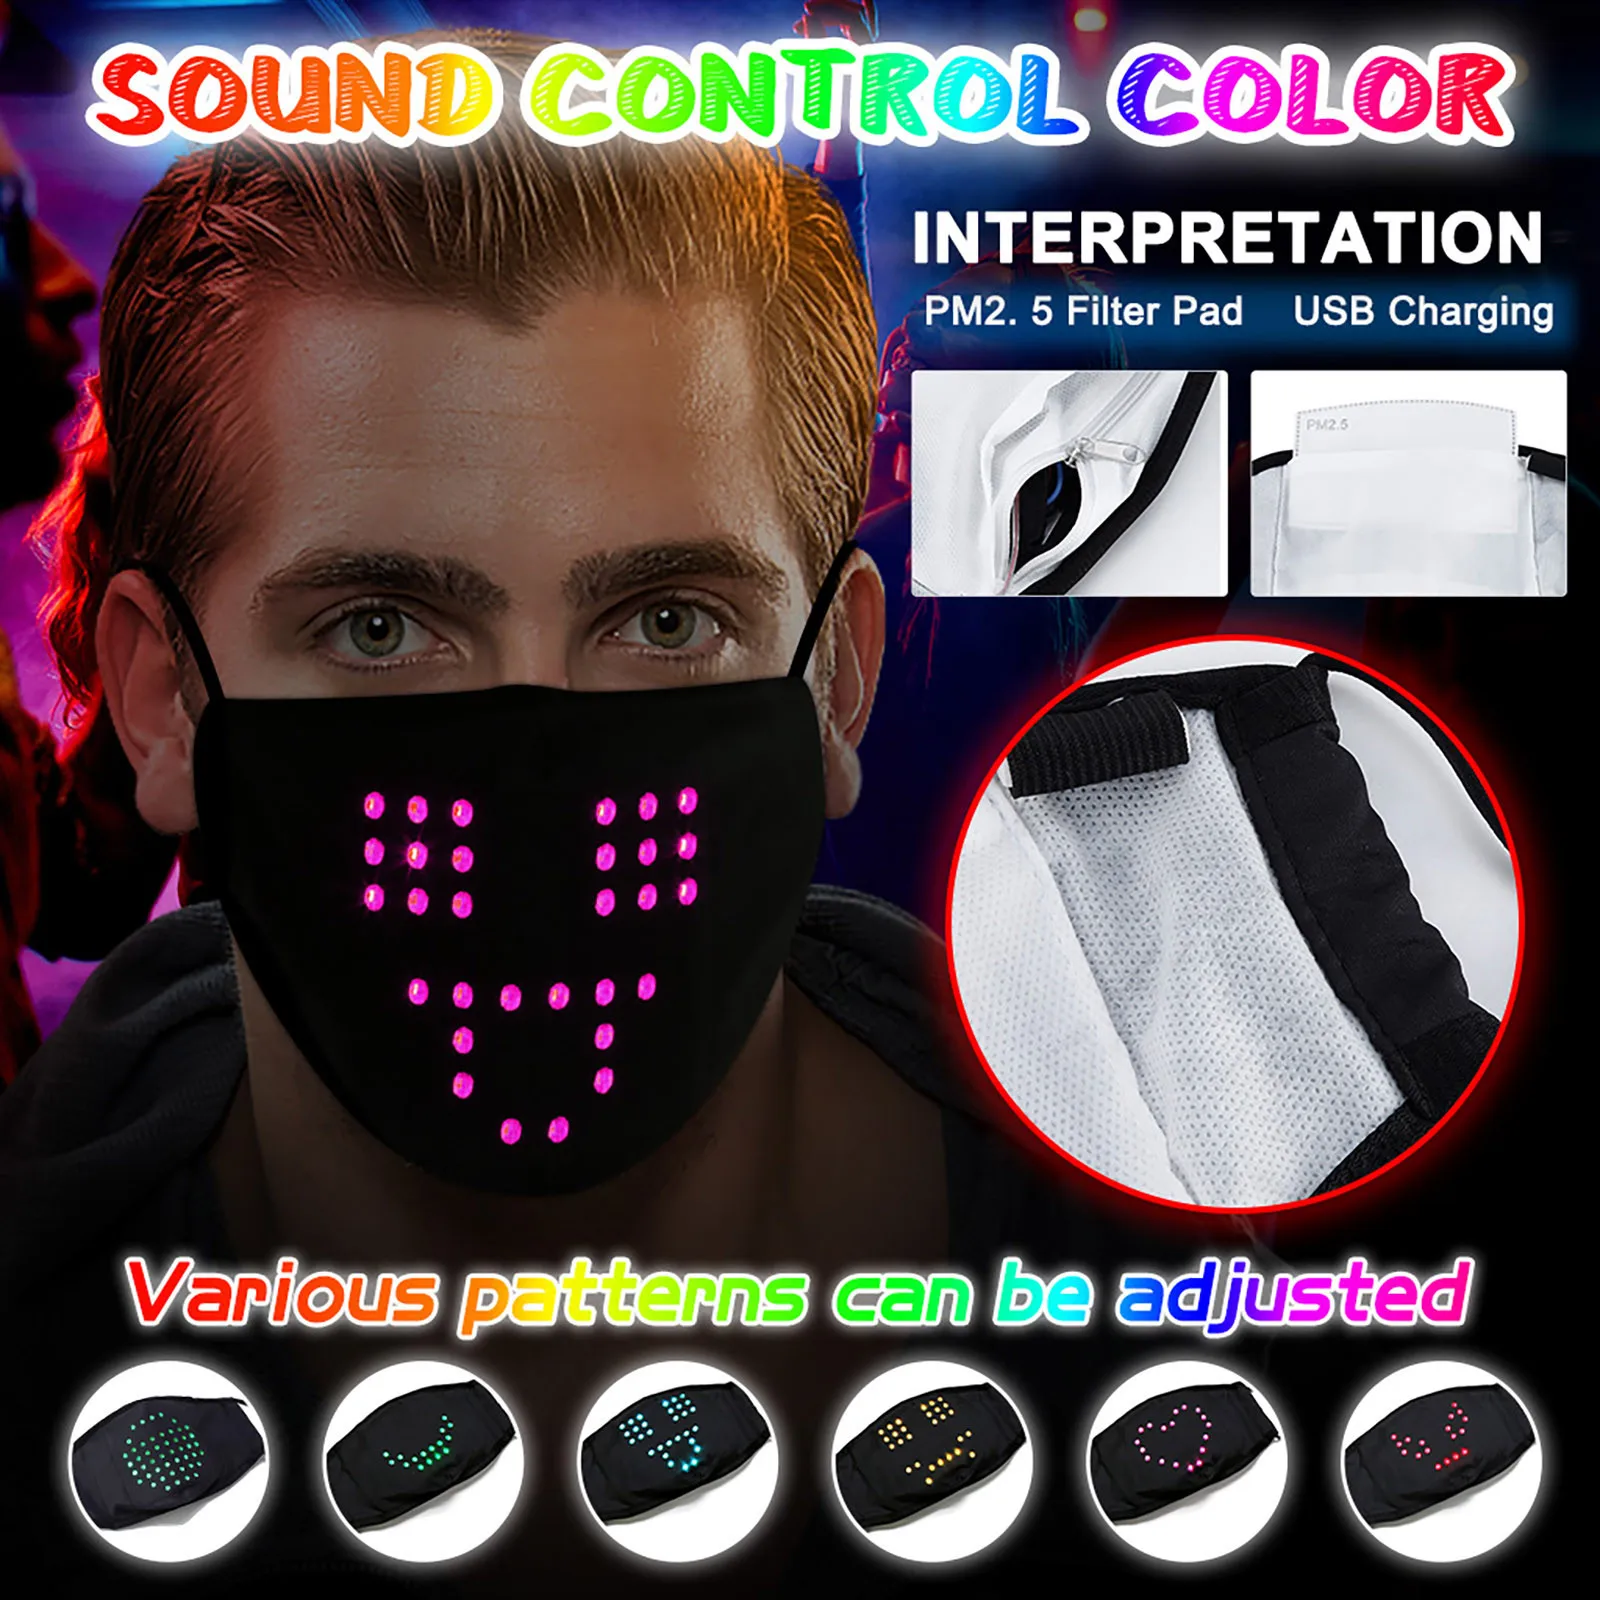 

Diy LED Mask For Women Fashion Voice-activated Luminous Mask Masquerade Festival Party Face Party Decoration Masks With Filter